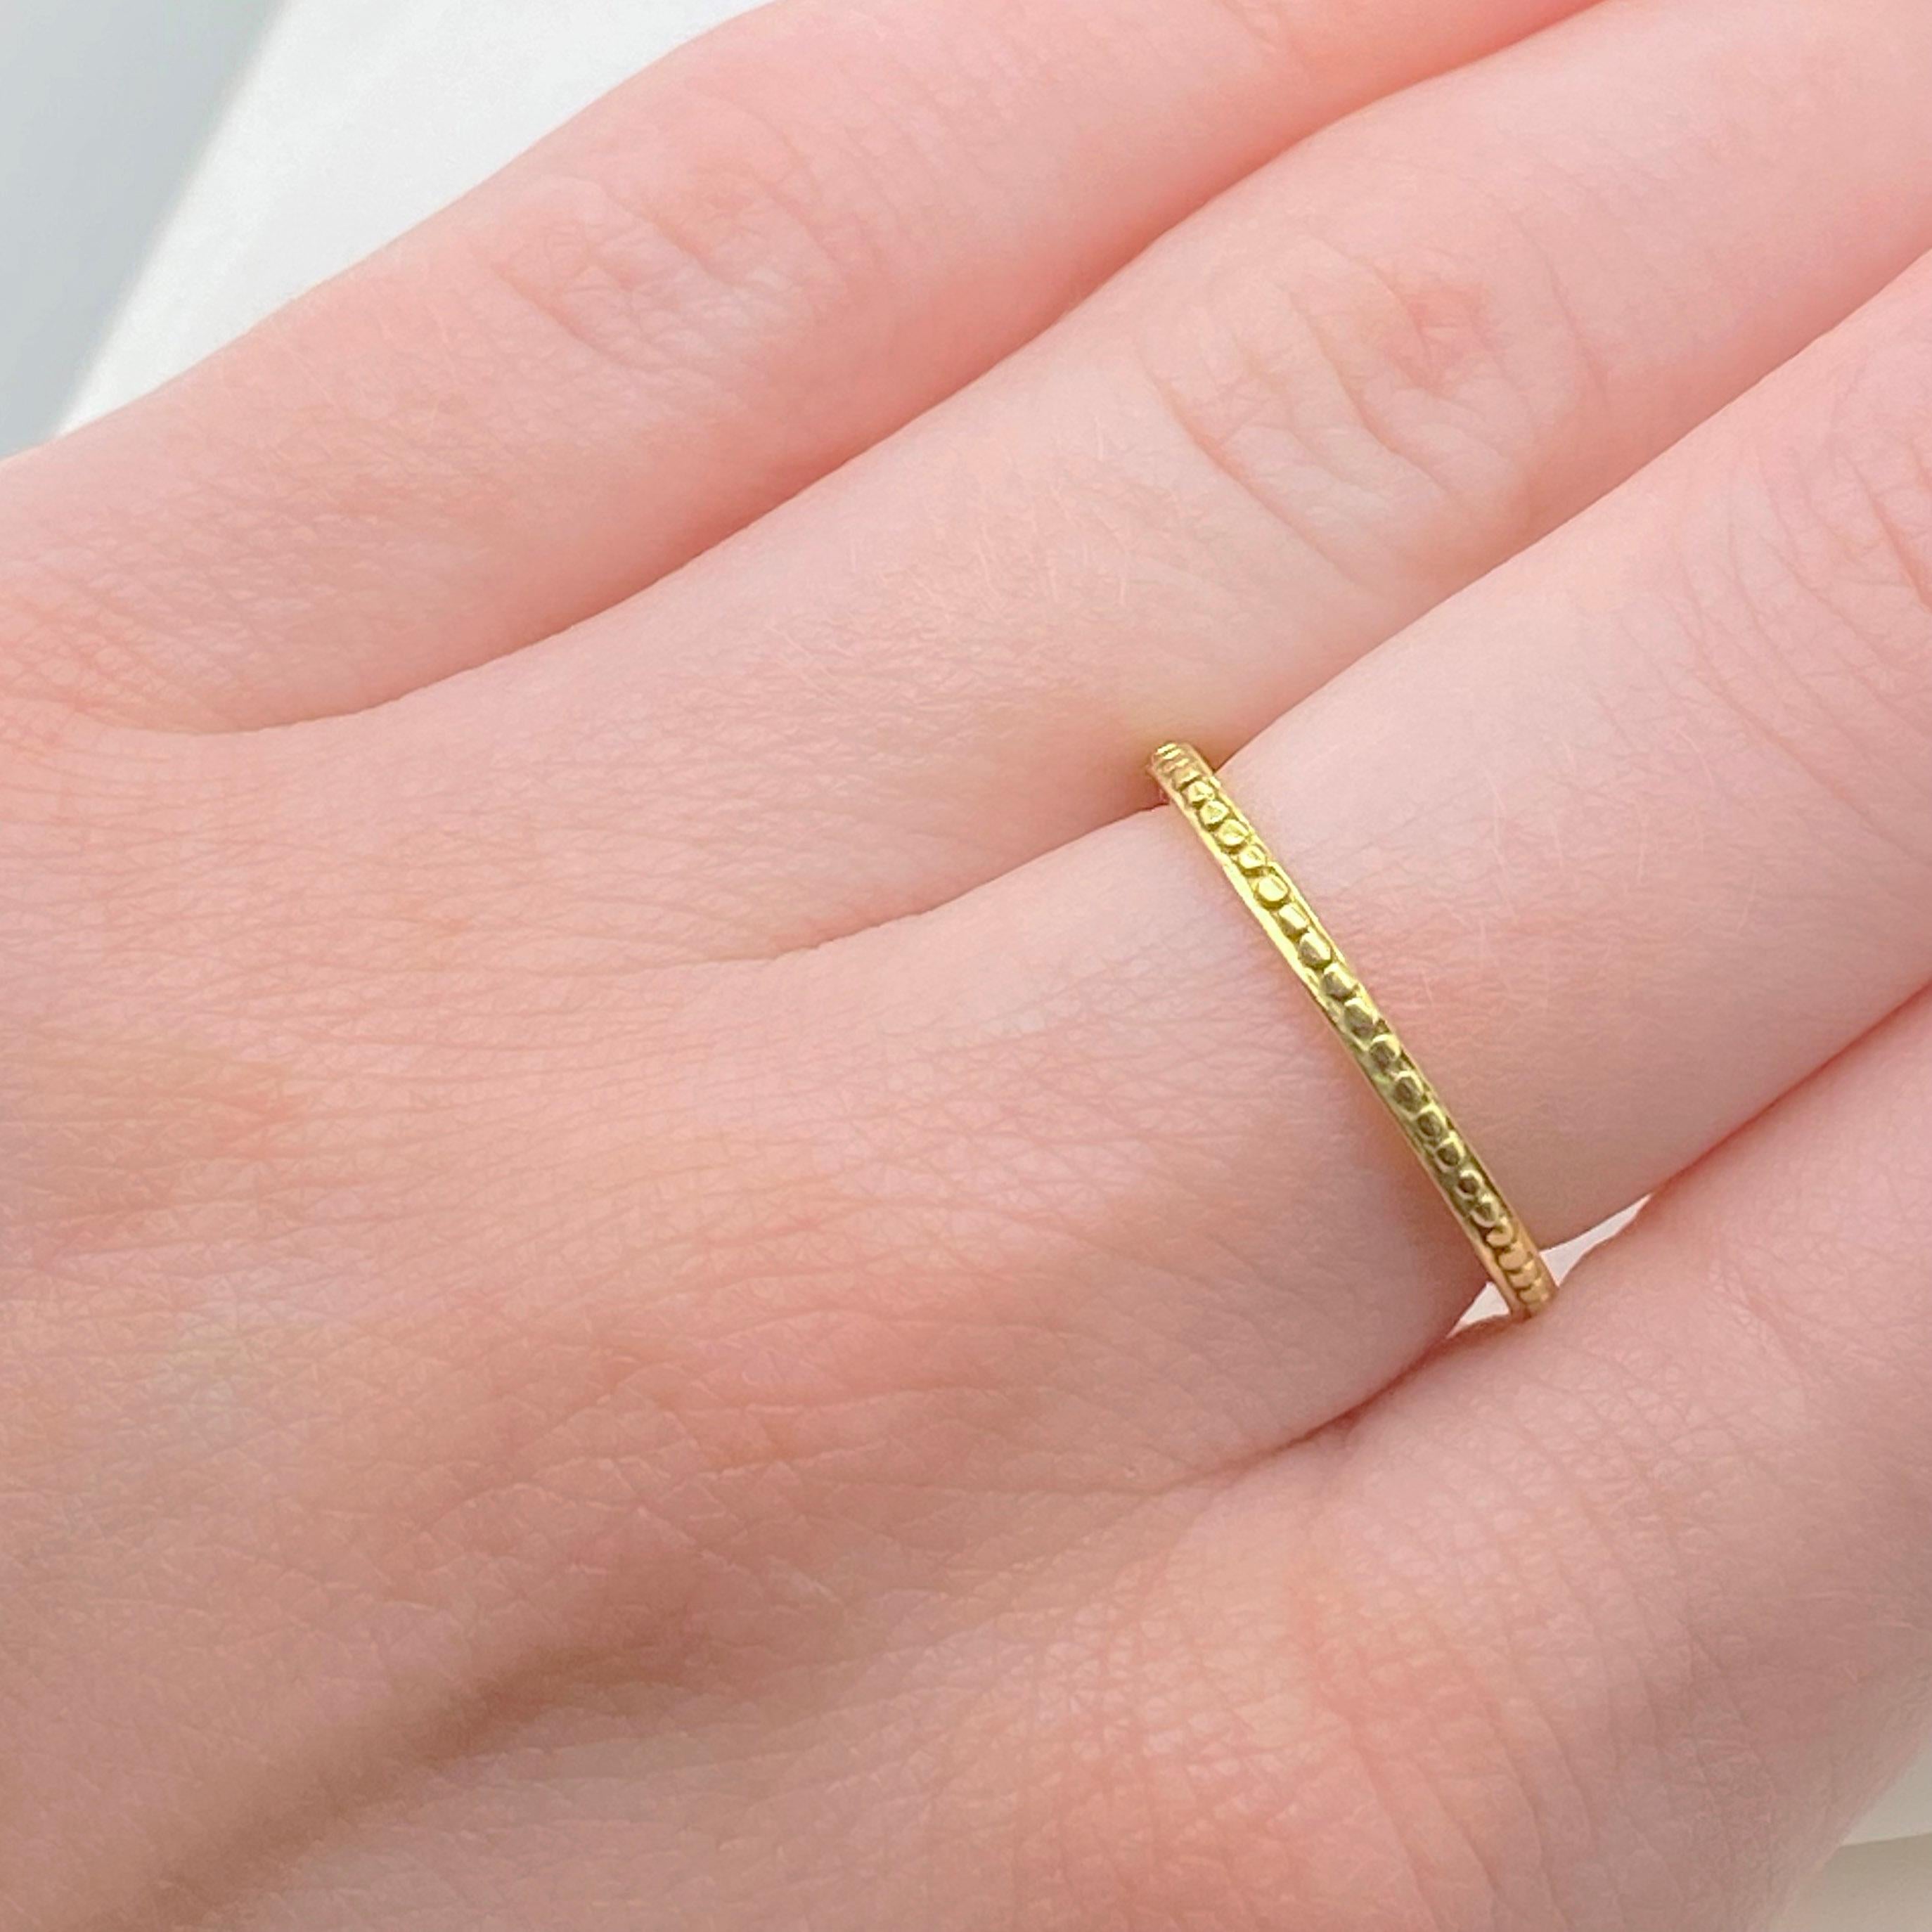 This is a gorgeous and slender 18K yellow gold band with beaded details, perfect as a minimalist wedding ring, or stacking ring. The details for this beautiful ring are listed below:
Metal Quality: 18k Yellow Gold
Band Width: 1.7 millimeters
Ring